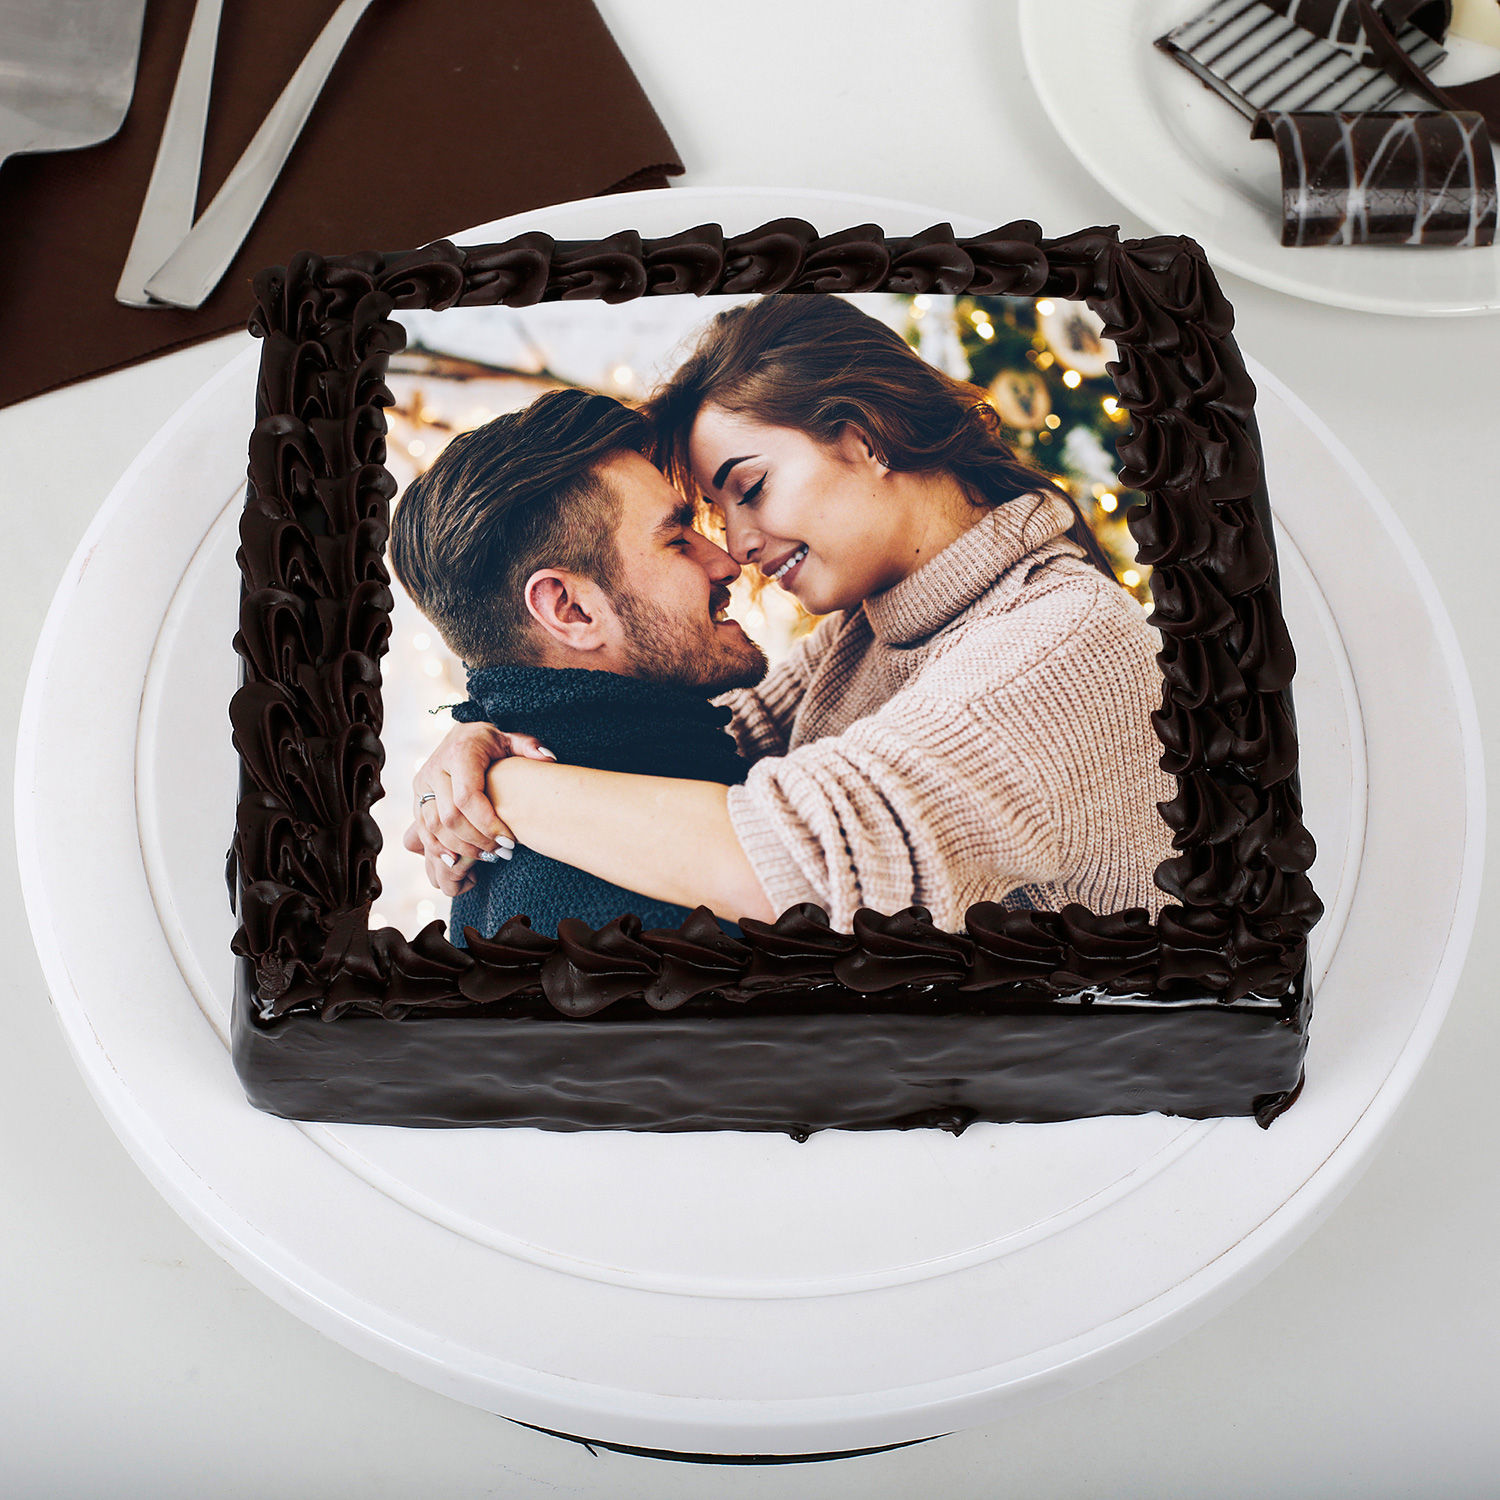 A Photo cake with Couples is the best Birthday Cake Designs for Adults